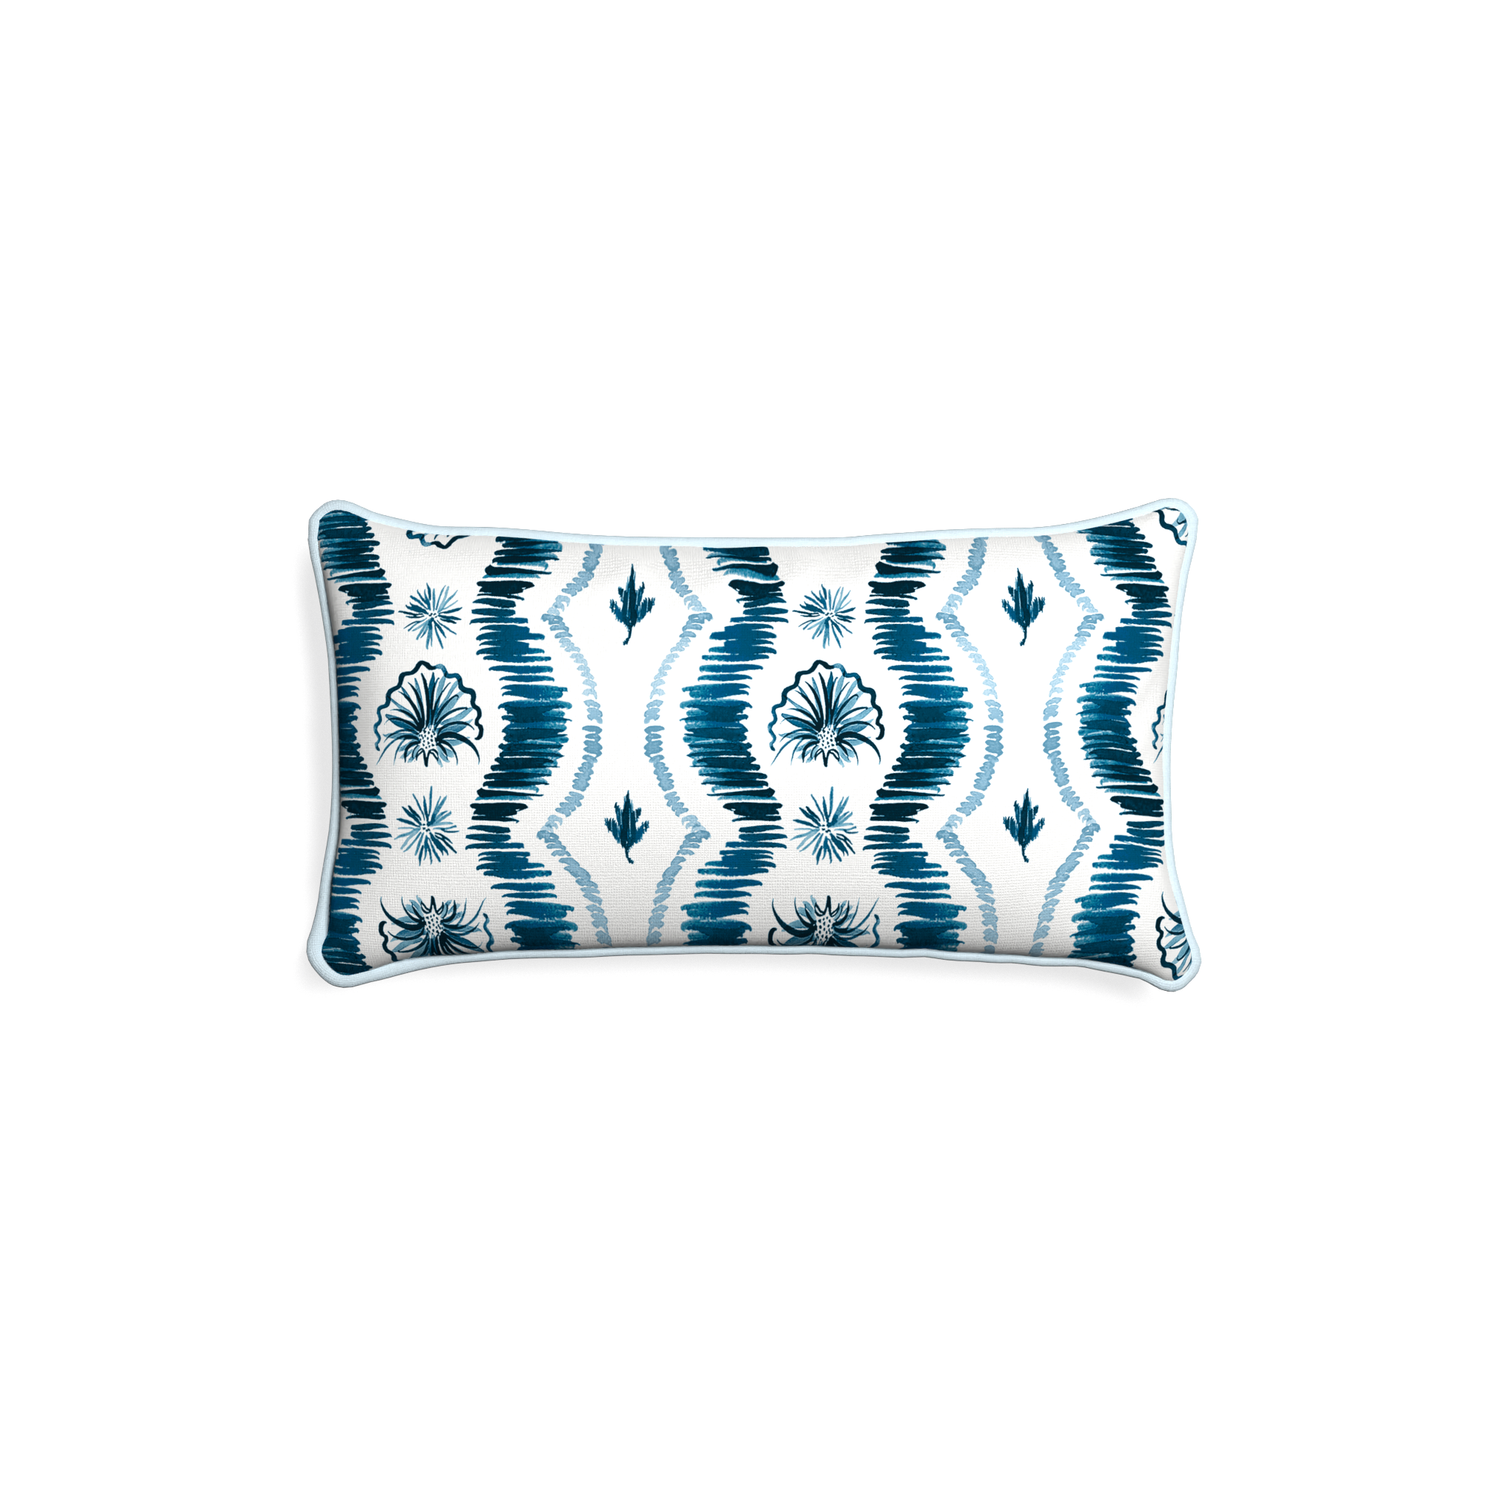 Petite-lumbar alice custom blue ikatpillow with powder piping on white background